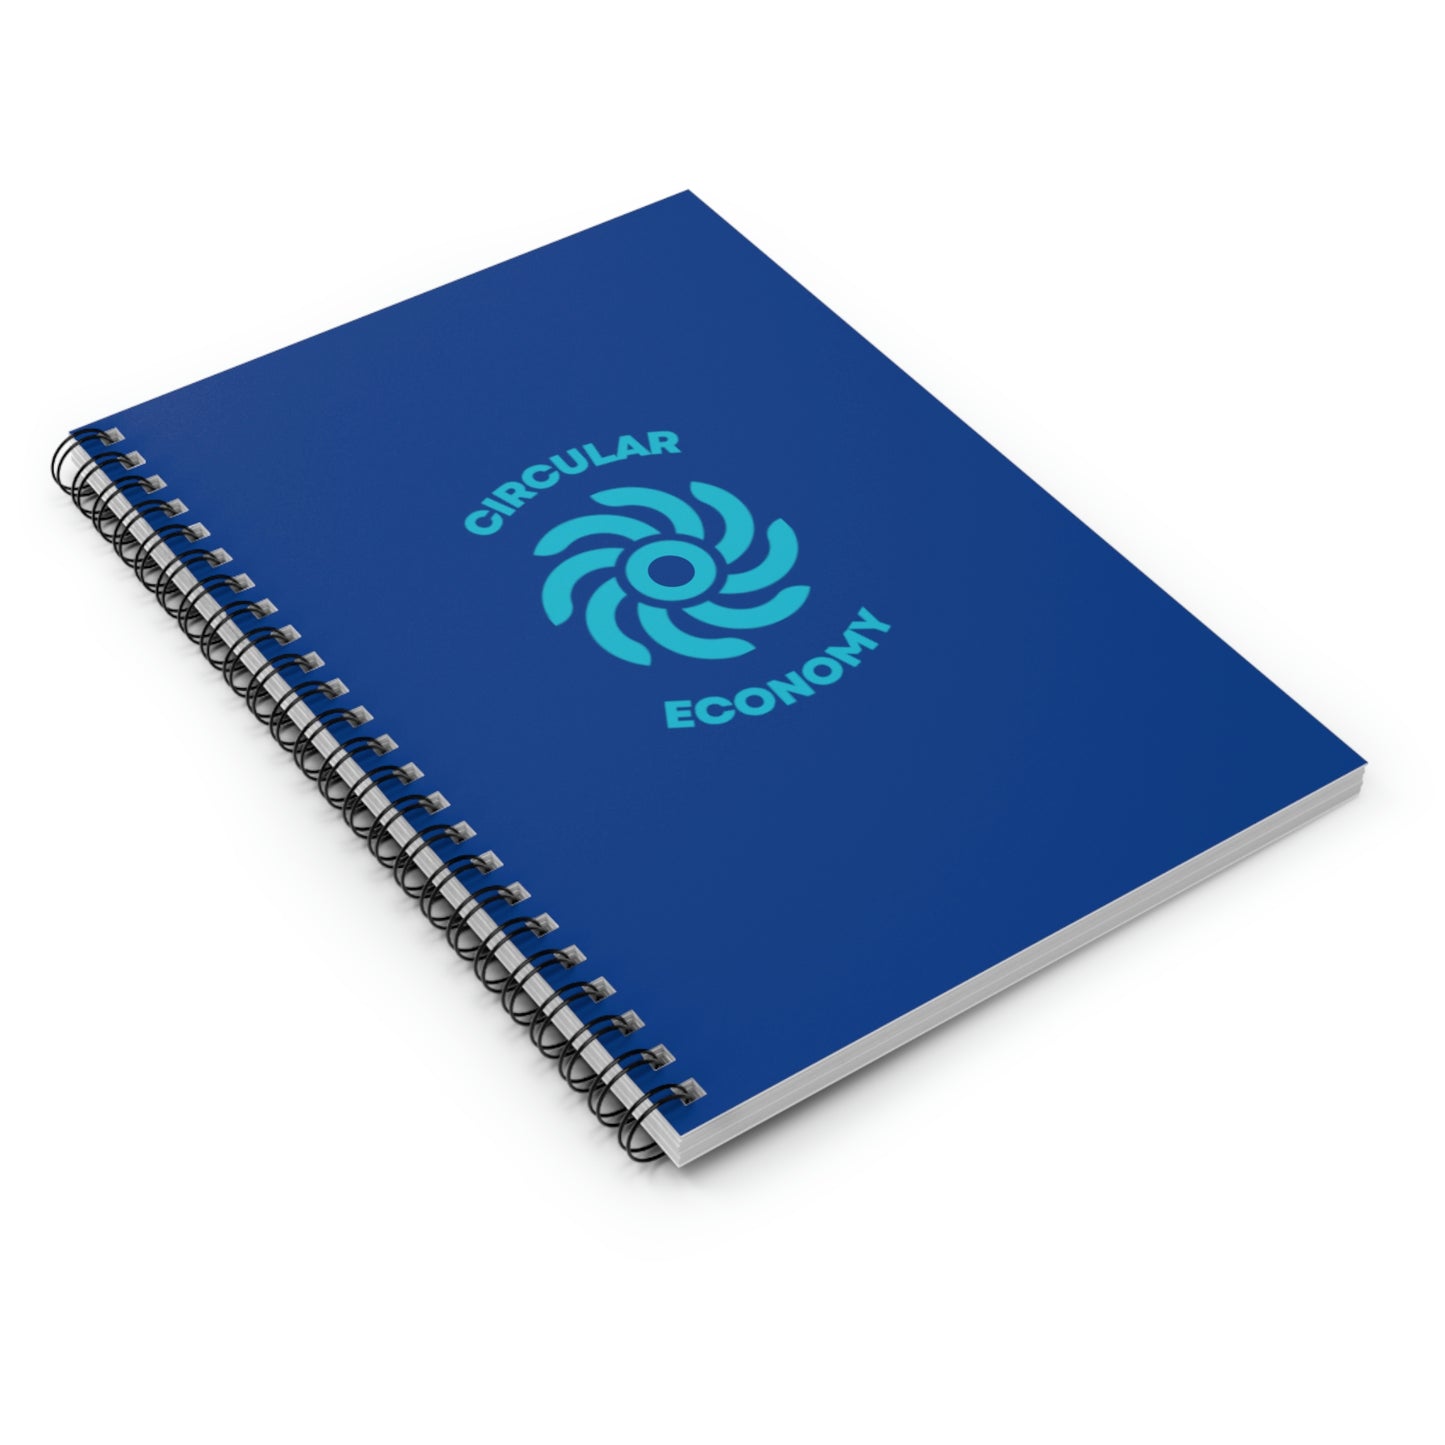 CIRCULAR ECONOMY - Spiral Notebook - Ruled Line - Blue Cover